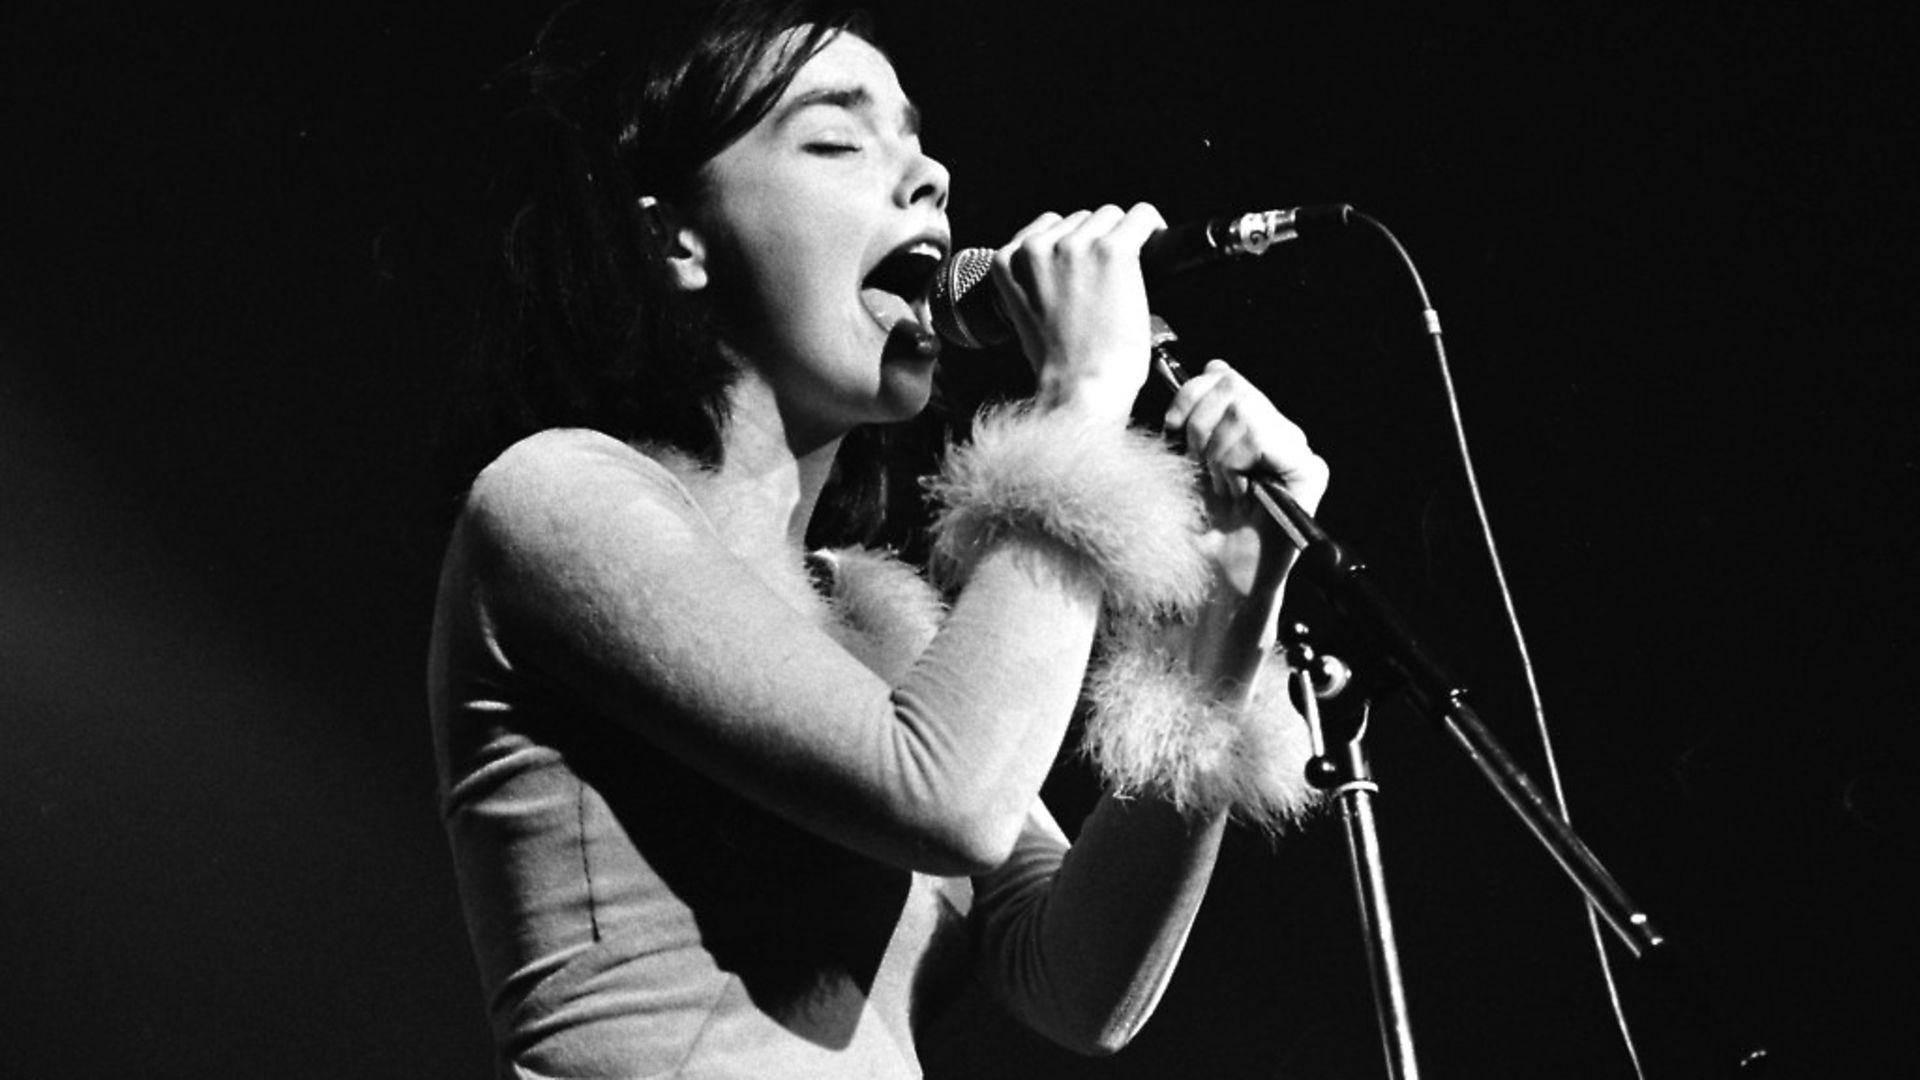 Bjork performs on stage with The Sugarcubes in Paris, France, 1990. (Photo by Martyn Goodacre/Getty Images) - Credit: Getty Images